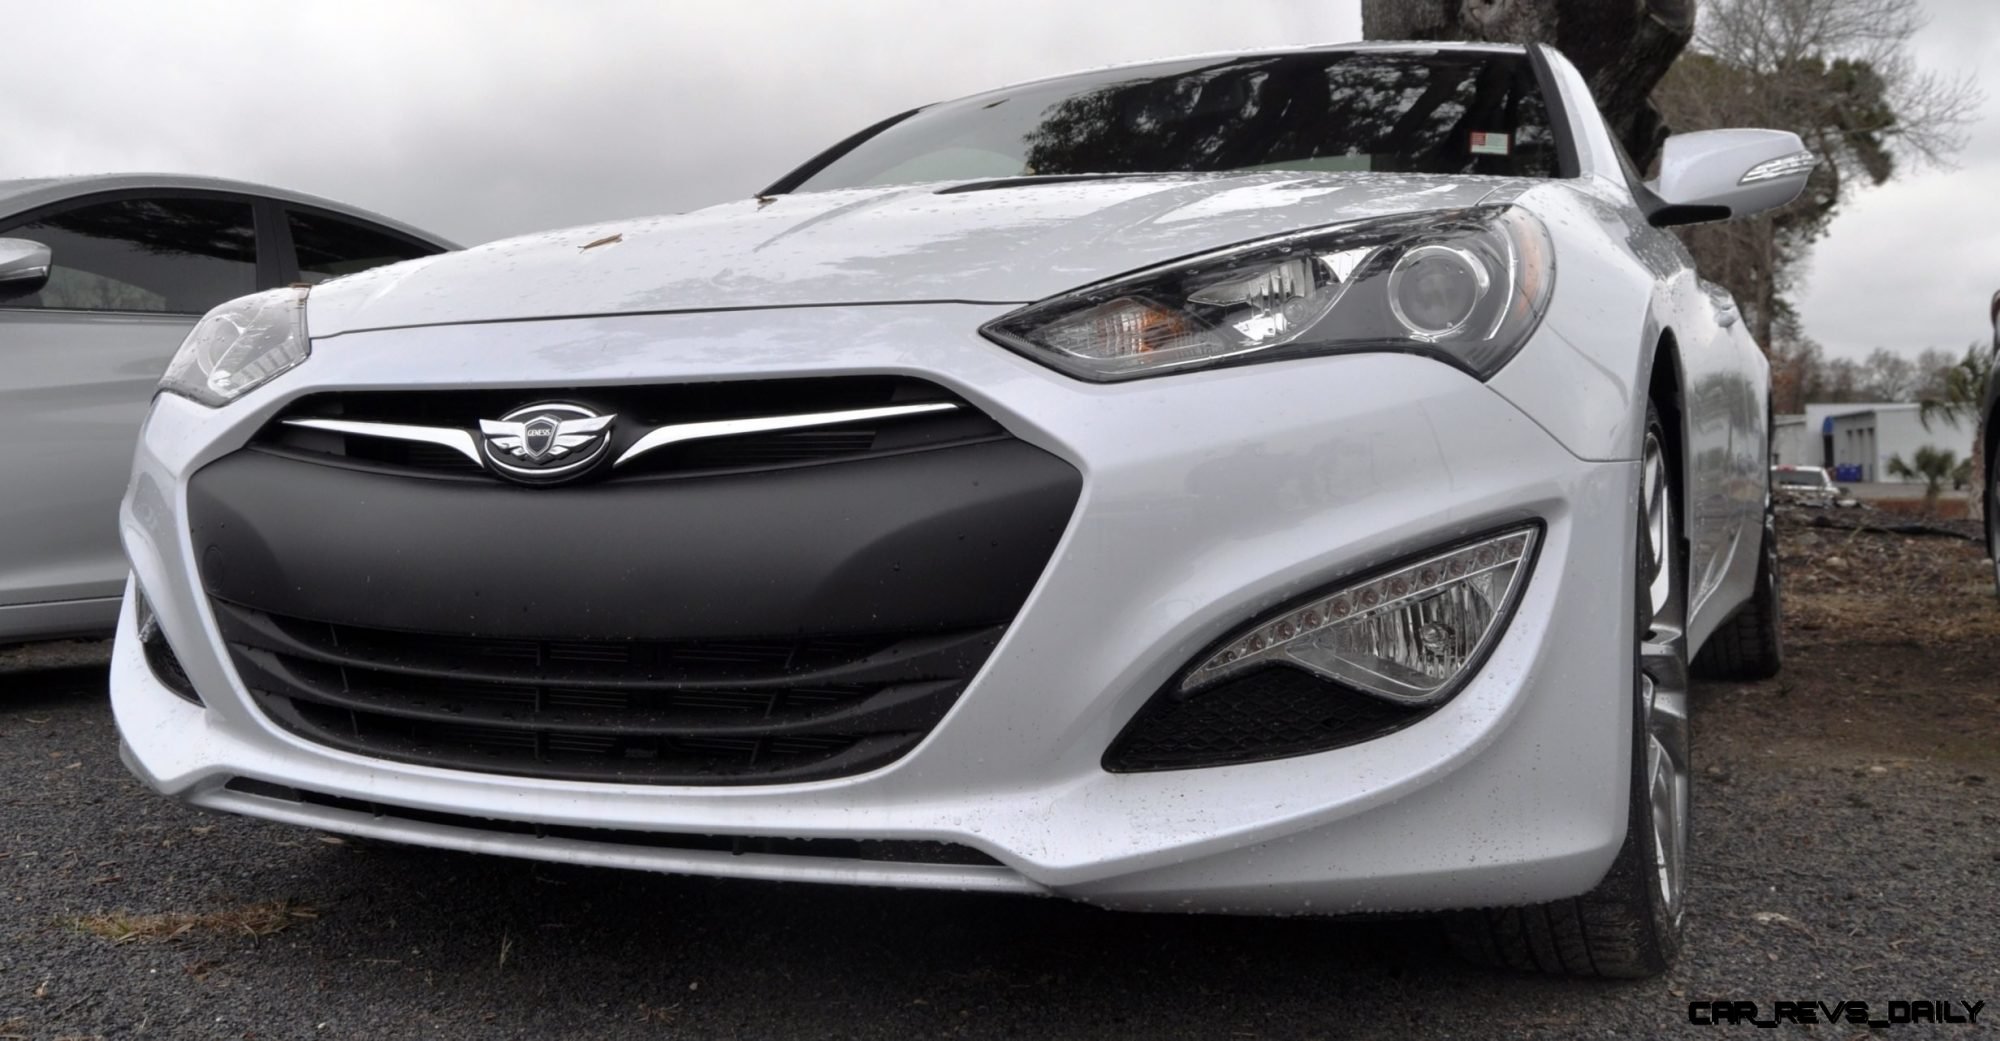 2014 Hyundai Genesis Coupe 3.8 Track Pack -- Looking Great in Latest Real  Life Photos! » Car-Revs-Daily.com